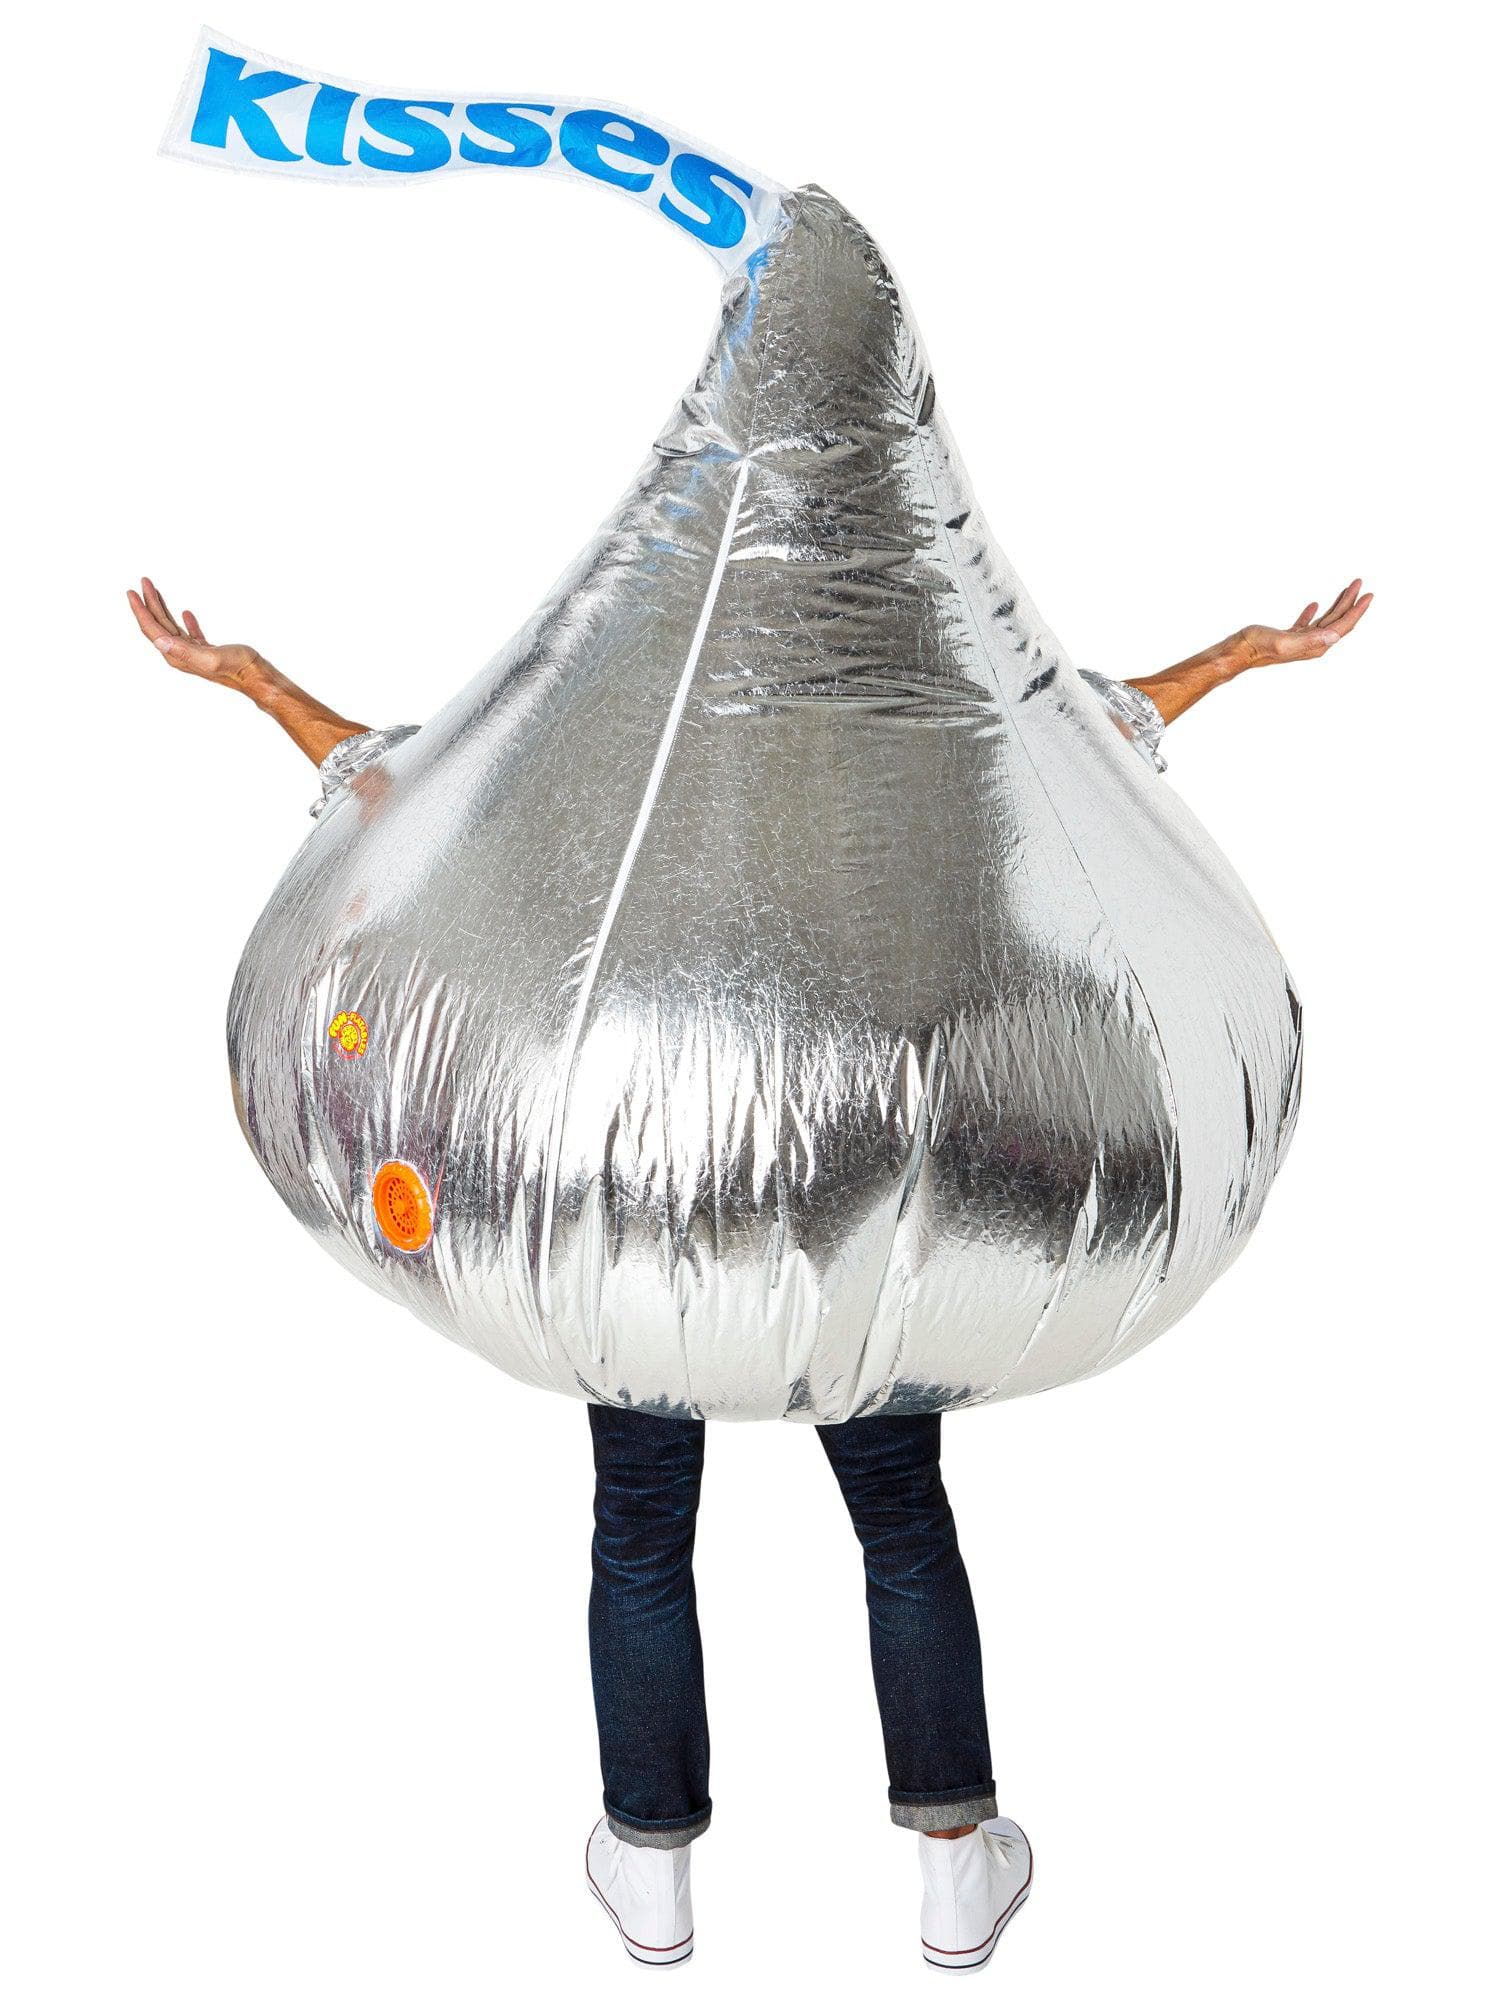 Adult Hershey's Kiss Inflatable Costume - costumes.com